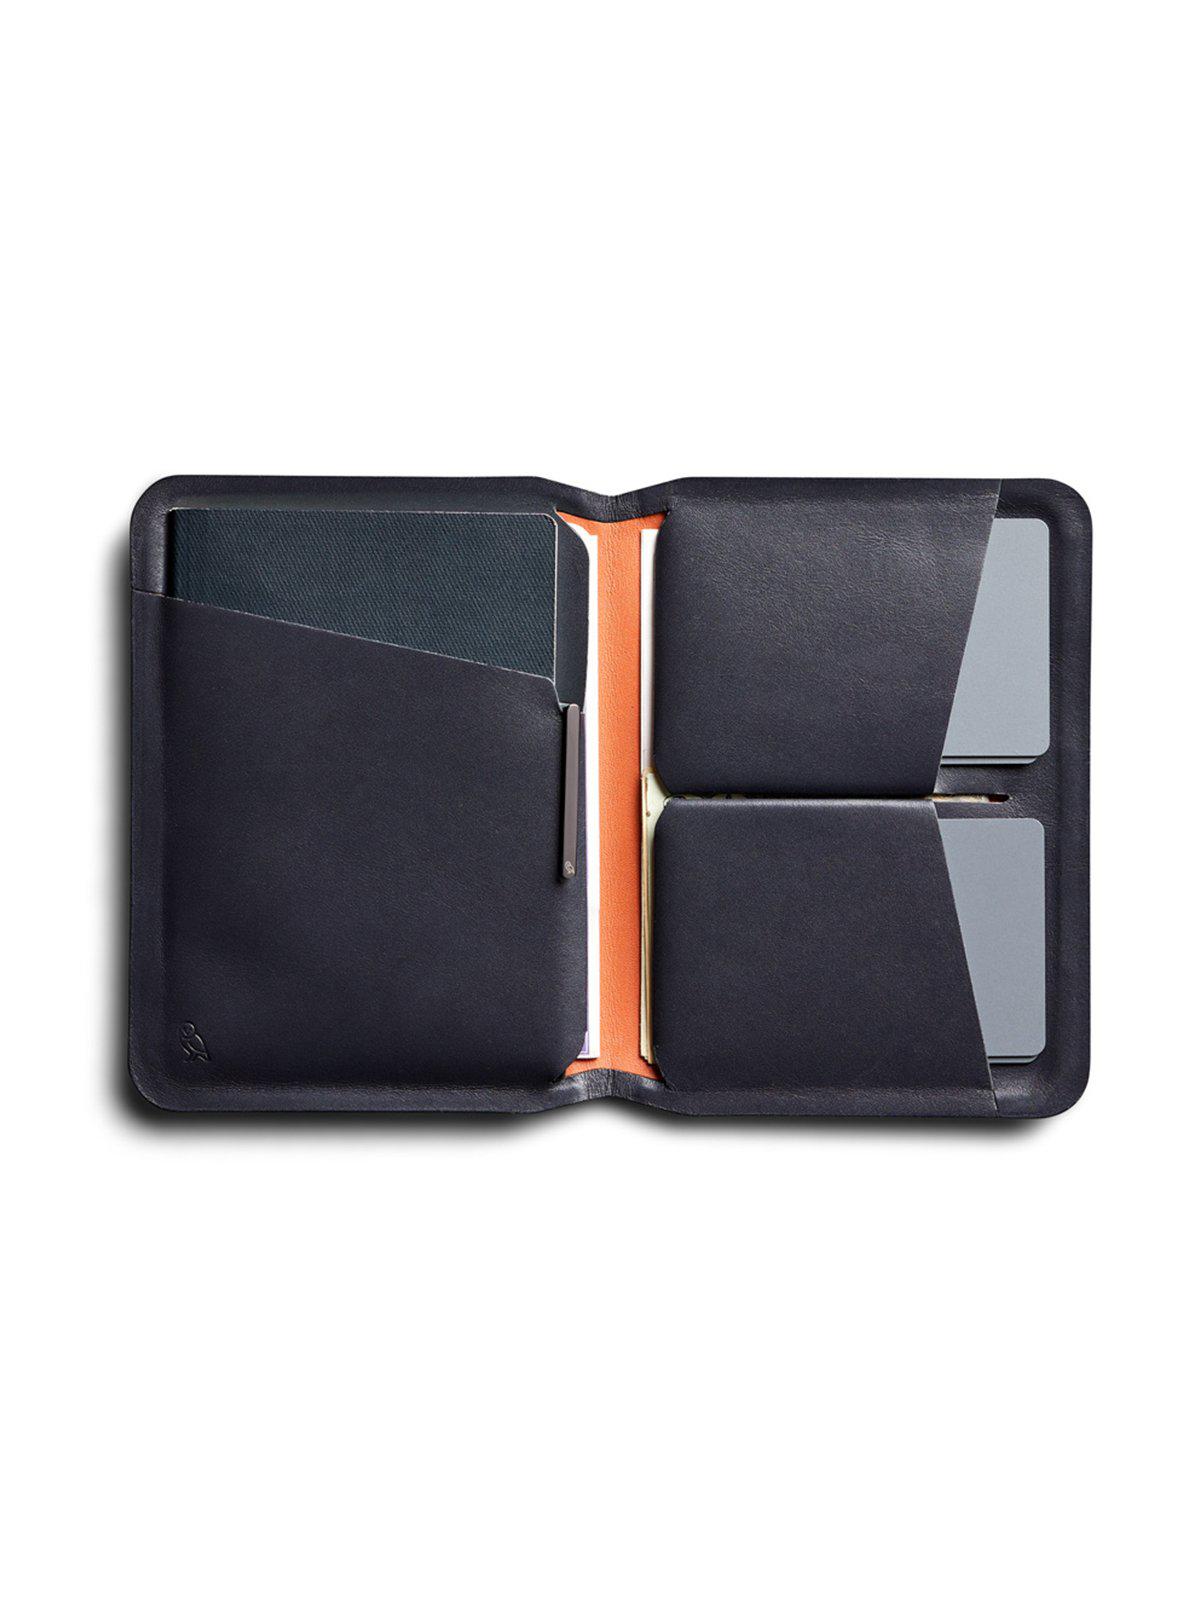 Bellroy APEX Passport Cover Onyx - MORE by Morello Indonesia